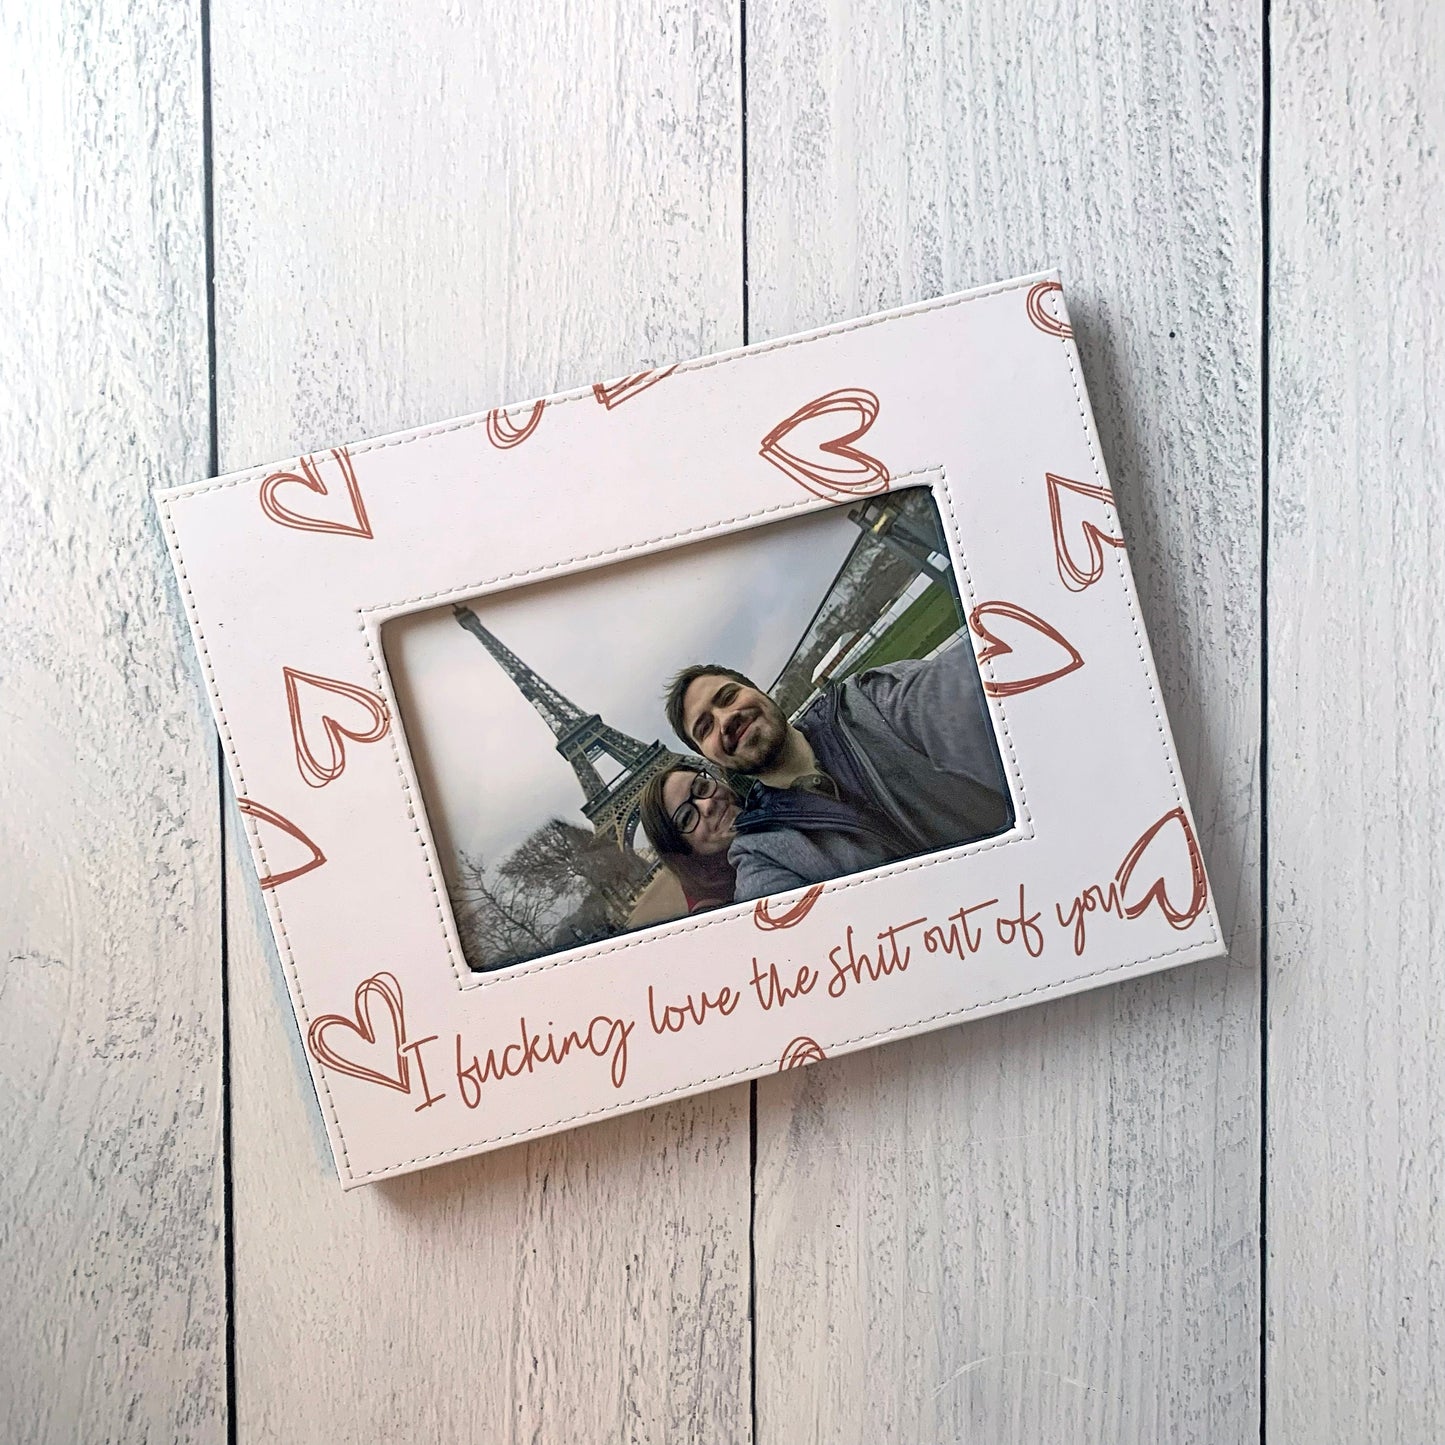 Valentines Day Gift, Galentines Gift, Funny Picture Frame, Funny Couples Gift, Anniversary Gift for Her, Best Friend Gift, Best Friend Frame